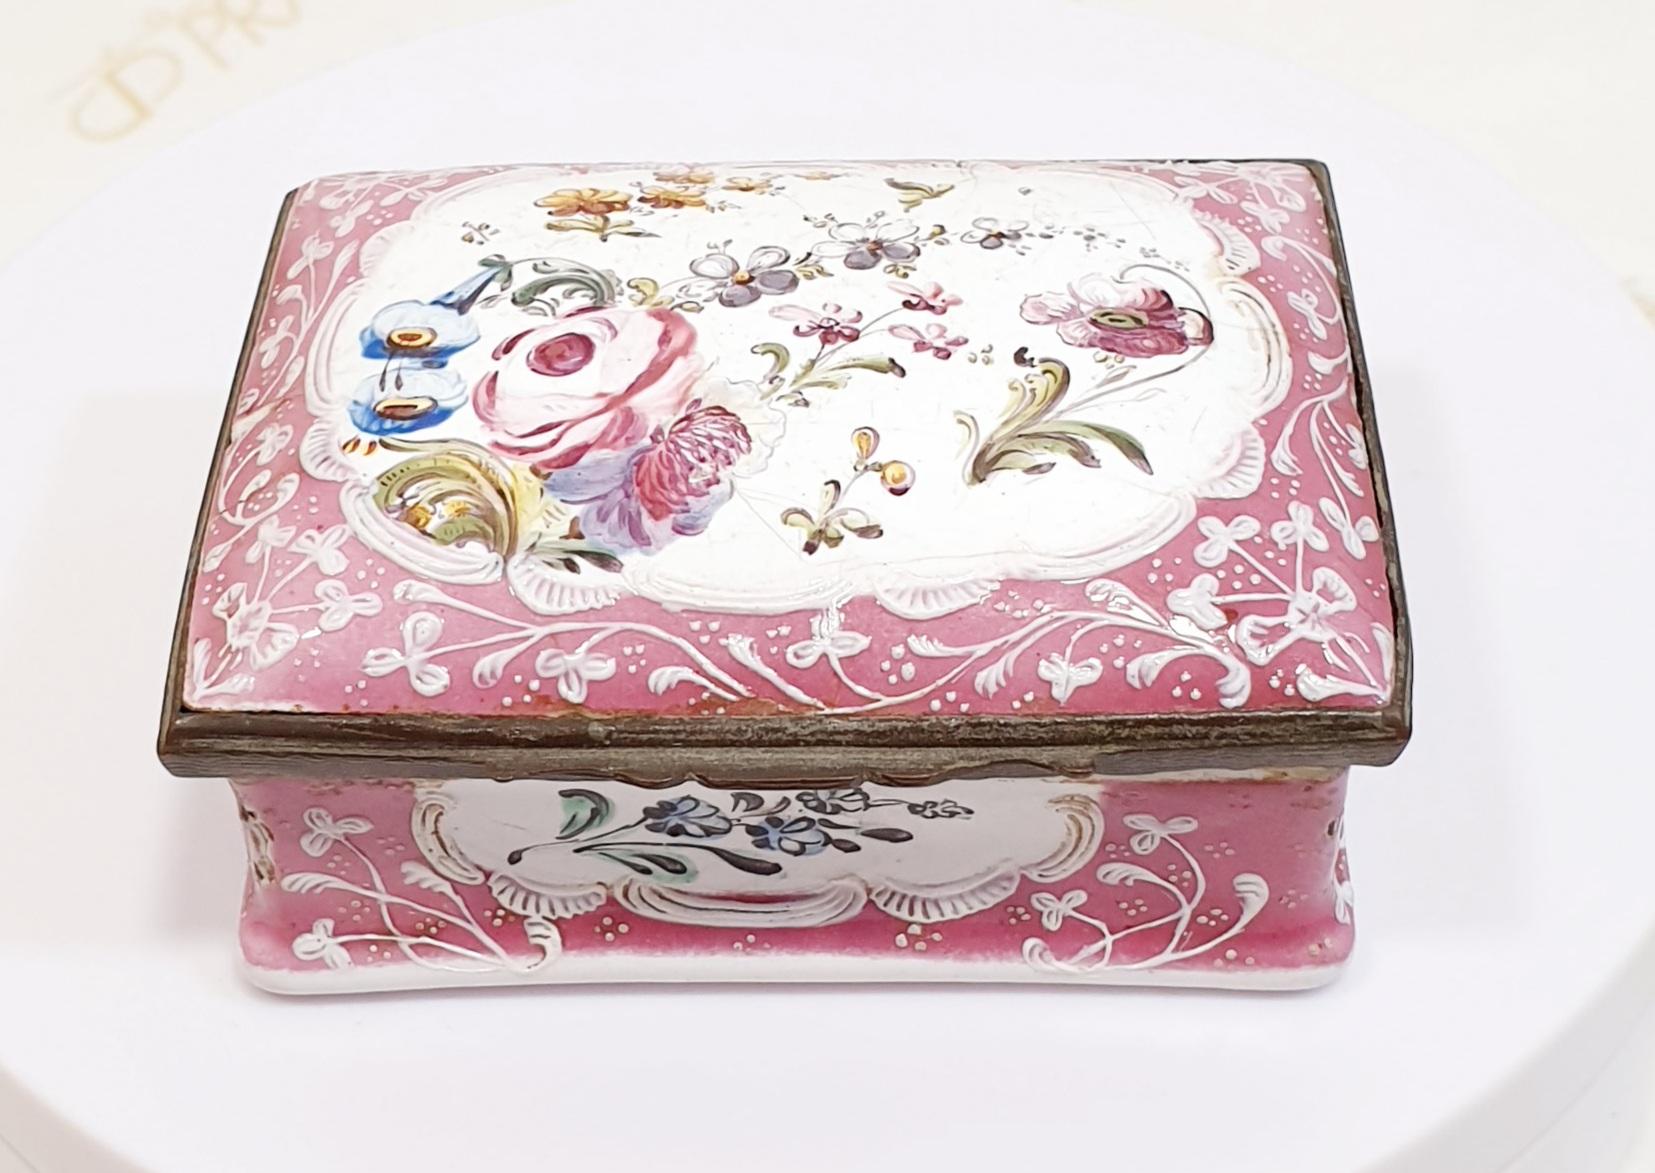 Antique 19th Jewellery Antique 19th Jewellery Hand Painted pink Porcelain Box with flowers aprox 1880 
Perfect gift for decoration or keeping personal and valuable items
Part of a collection of six 

PRADERA is a second generation of a family